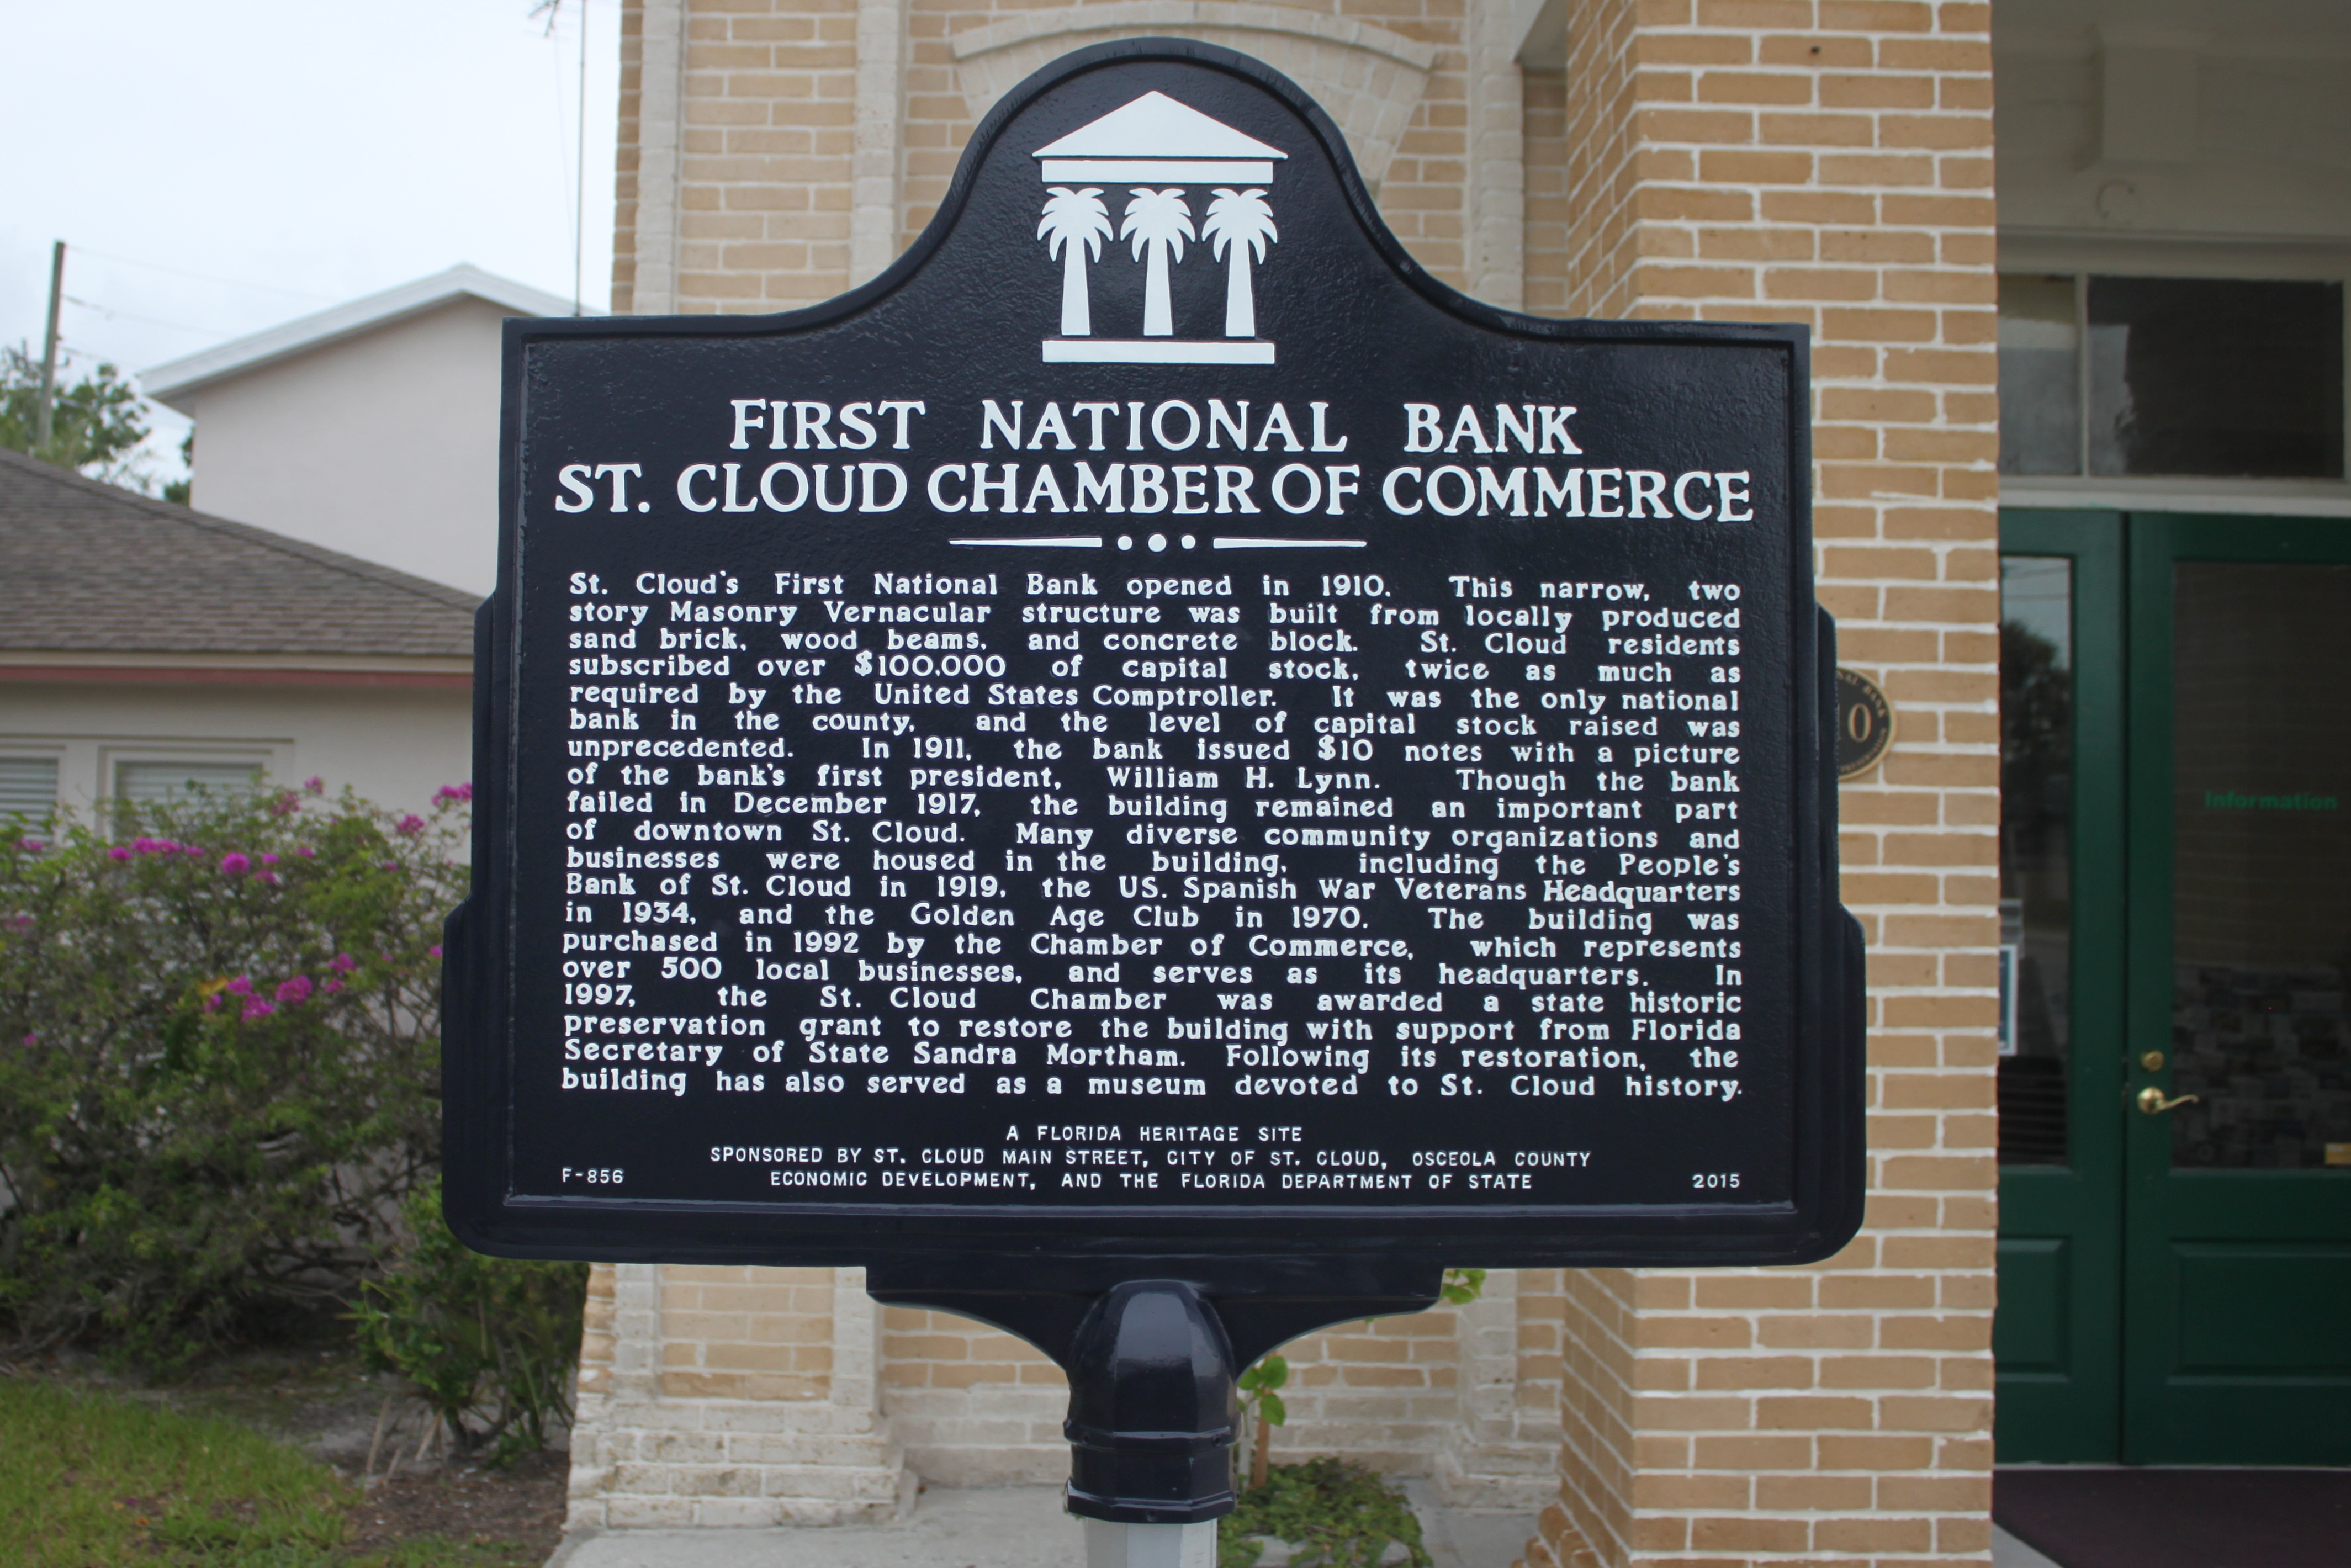 First National Bank/St. Cloud Chamber of Commerce Marker